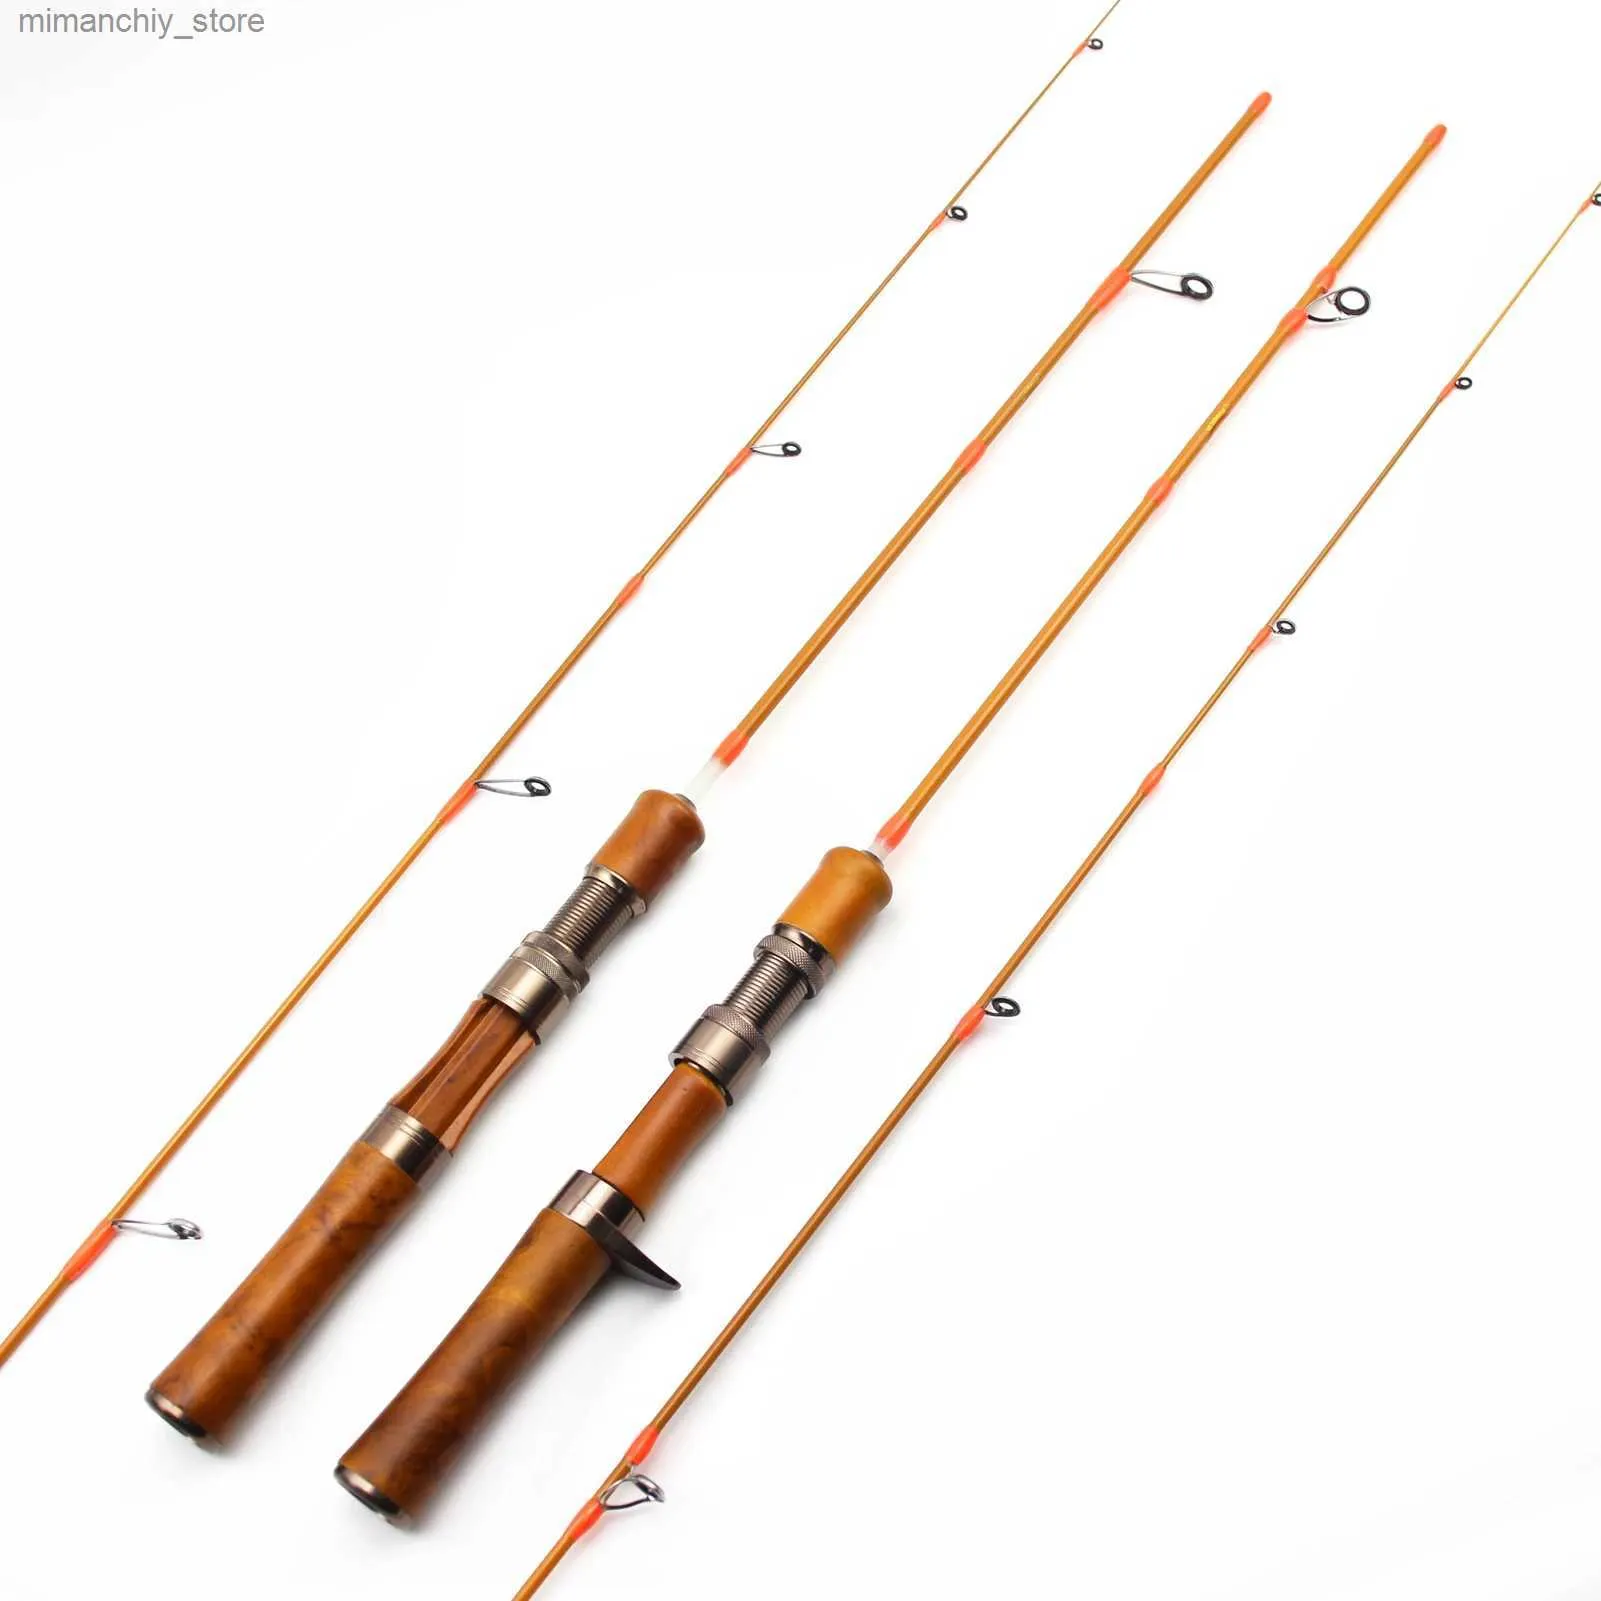 Boat Fishing Rods 1.4M Ul Slow Spinning Casting Lure Rod 1.5-8g Lure Ultralight Rods Ultra Light Solid Tips trout Stream Fishing pole pesca Q231031